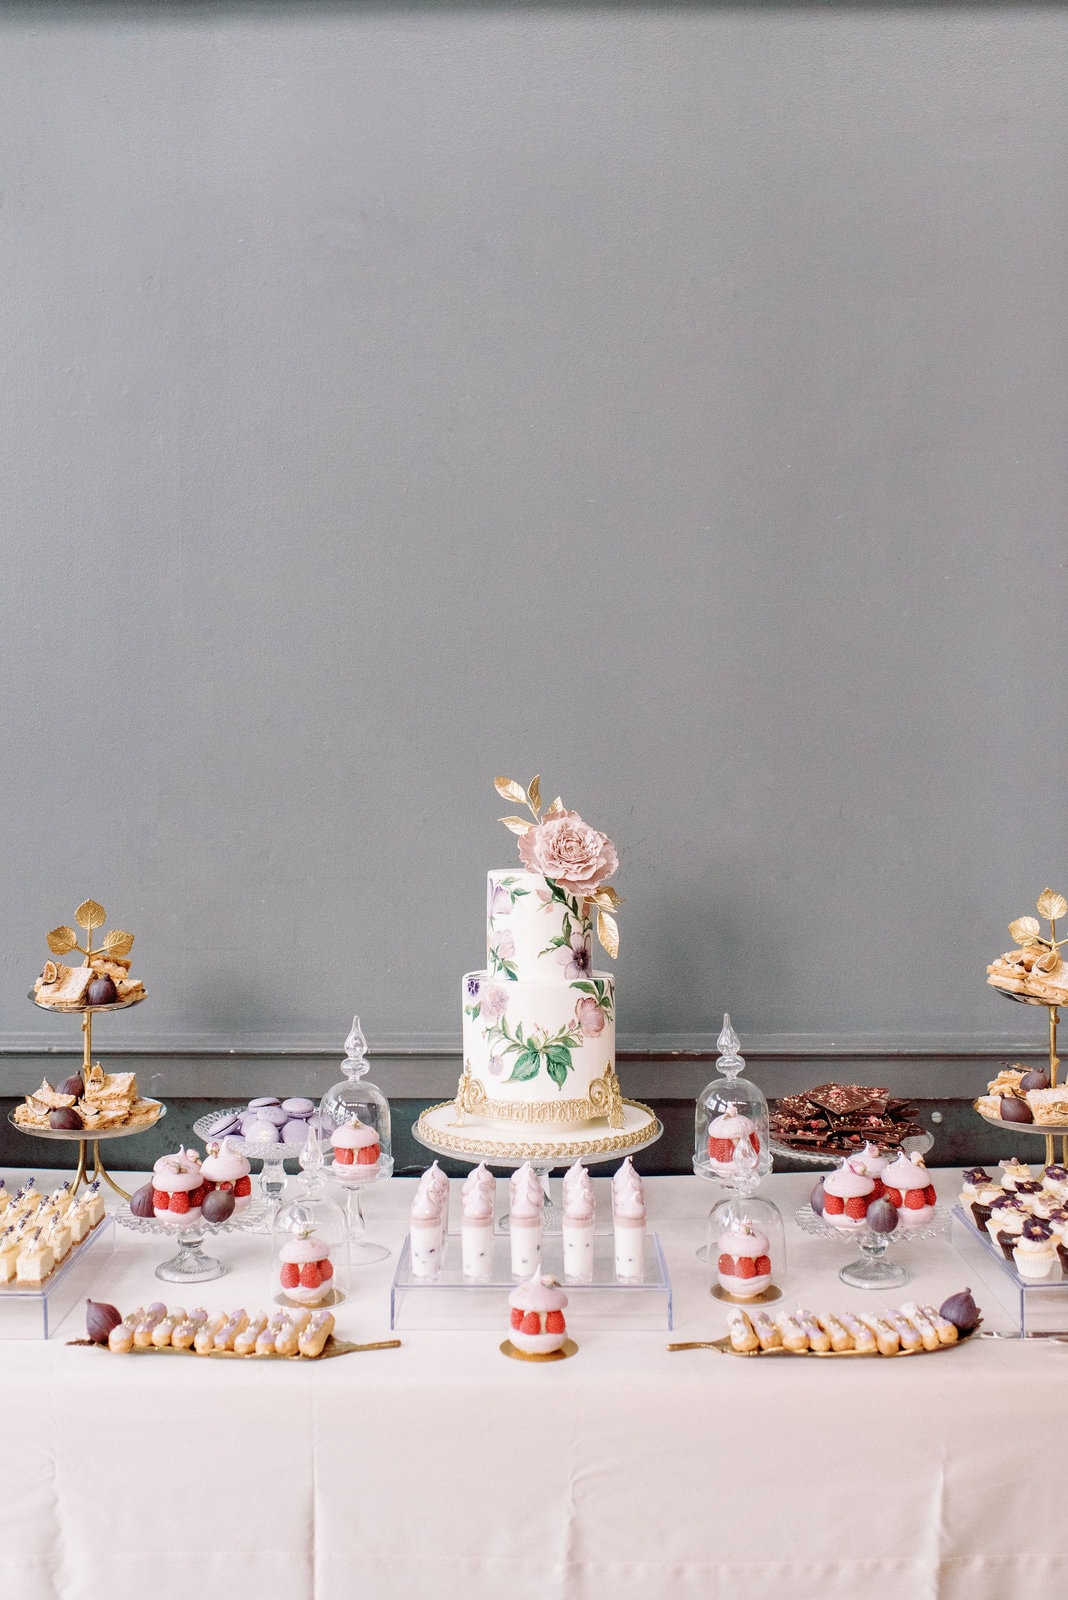 wedding cake by nadia and co exquisite romantic featured by martha stewart weddings steam whistle wedding toronto wedding venue jacqueline james photography